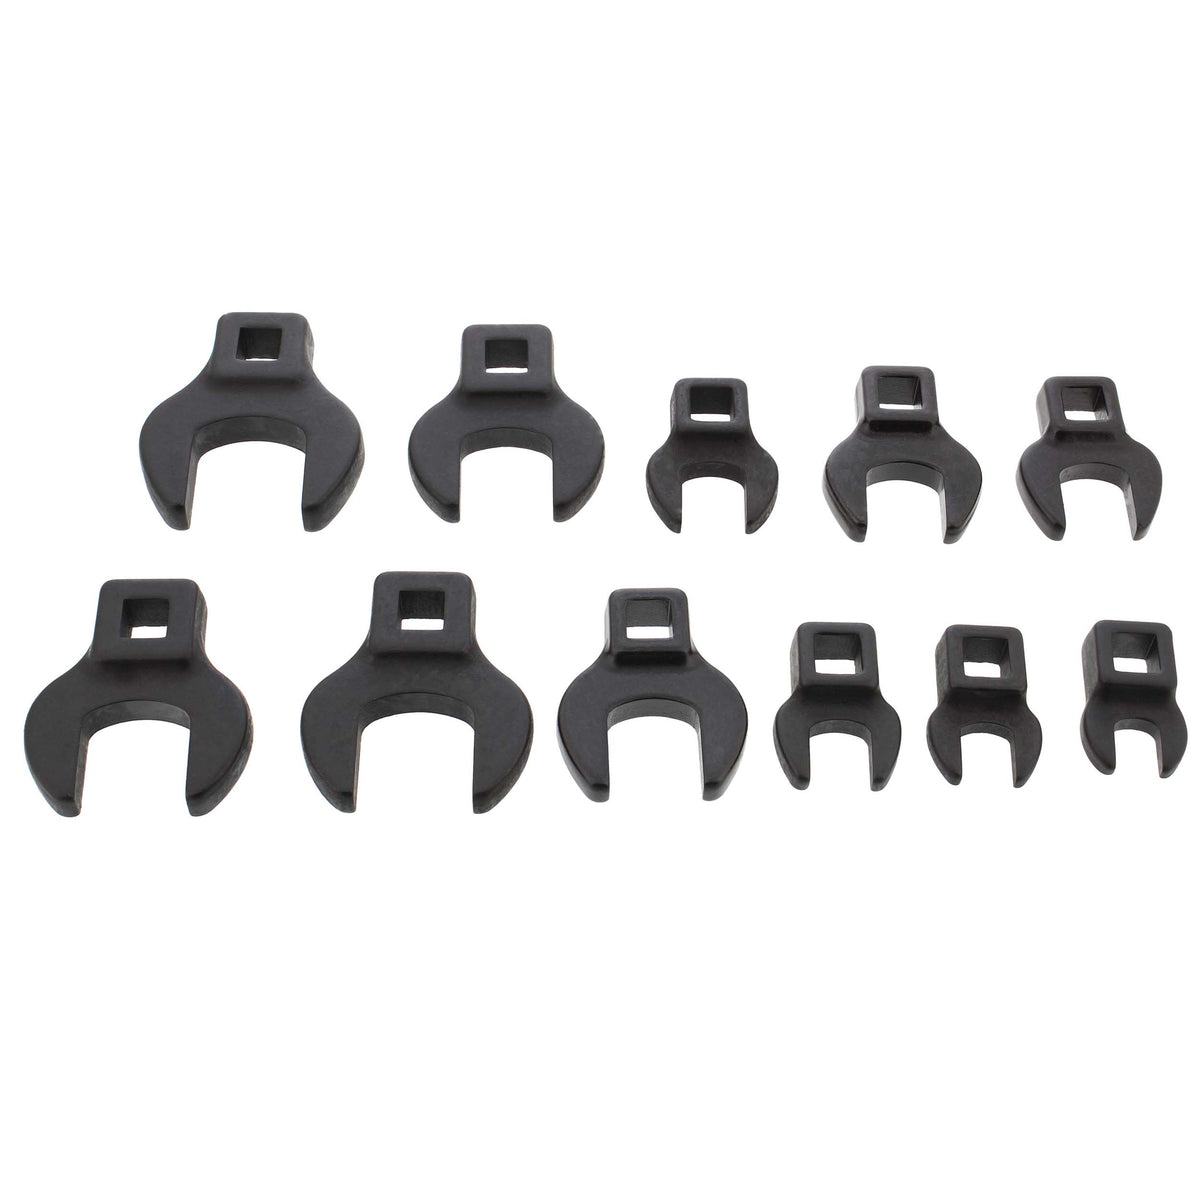 Crowfoot Wrench SAE Standard 3/8” Inch Drive 11-Piece Set